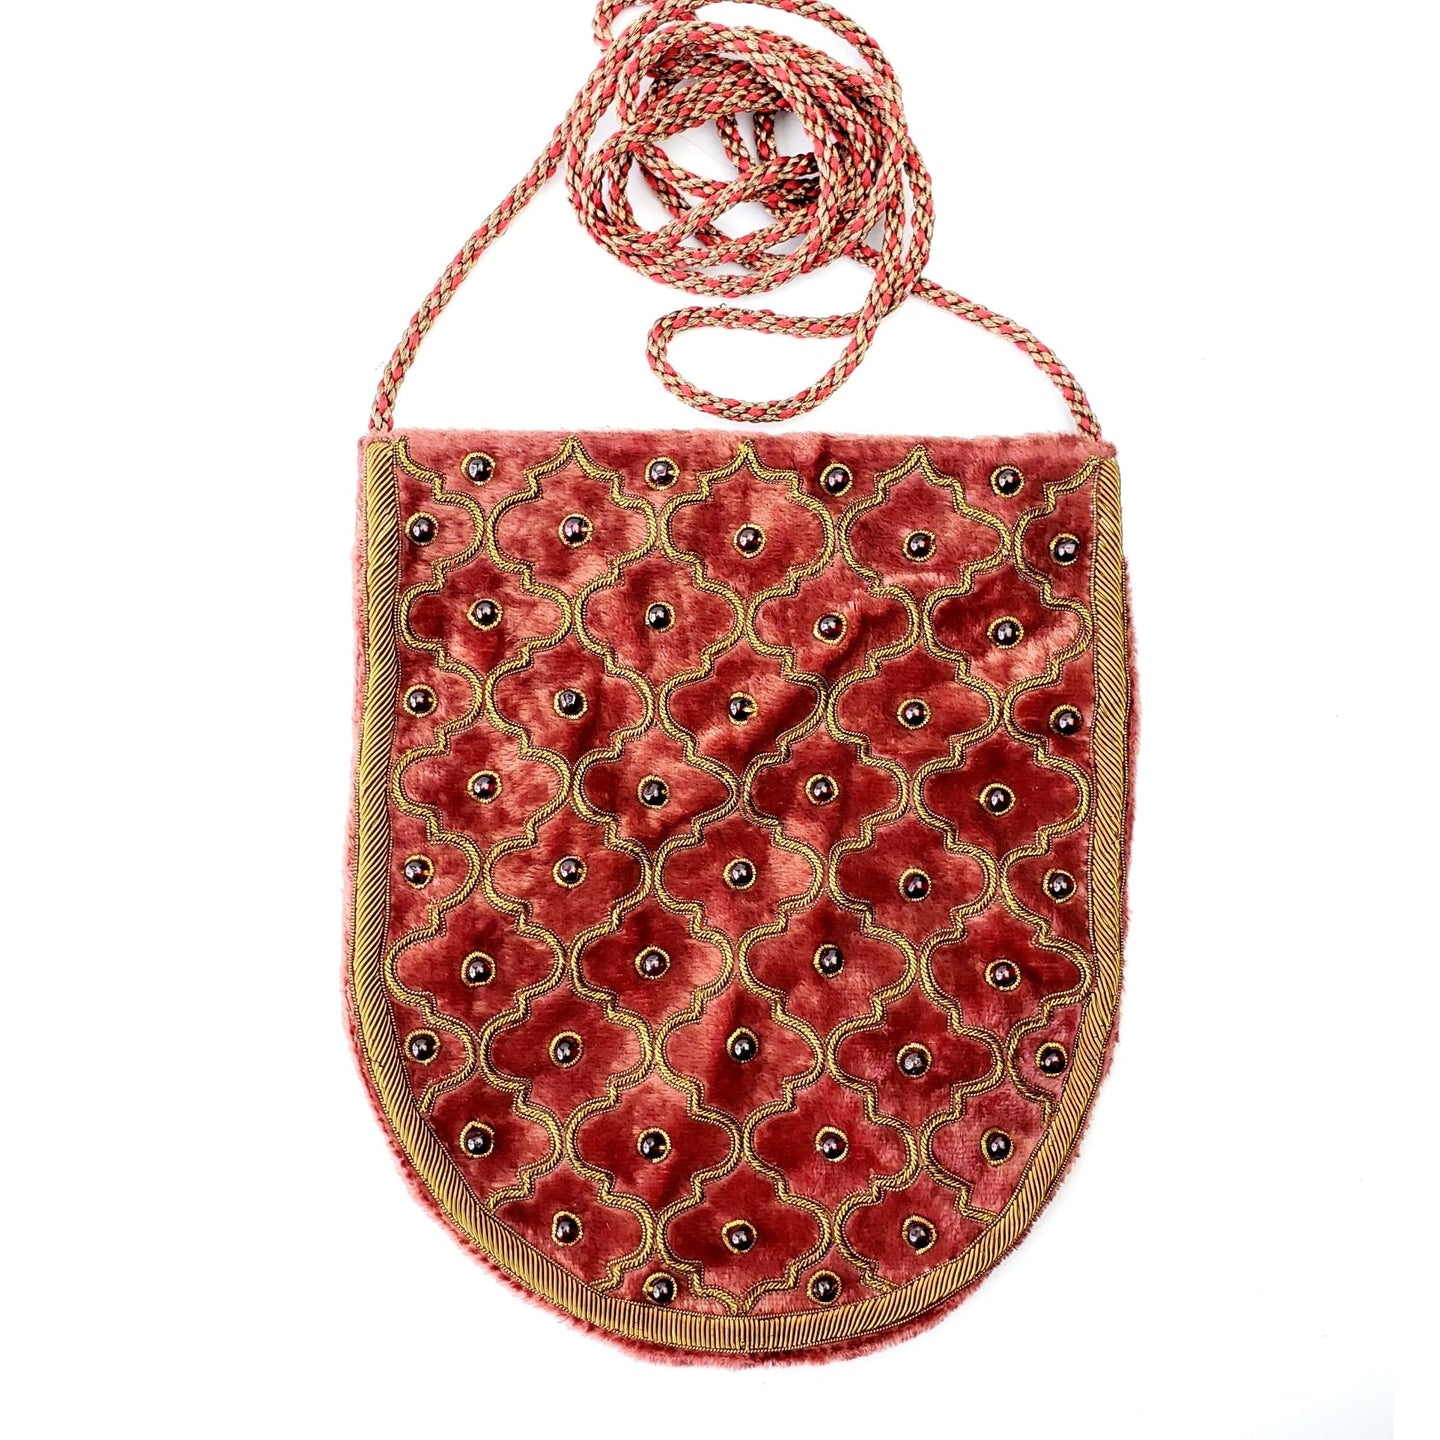 Hand embroidered luxury rust colored velvet crossbody bag with antique gold embroidery and inlaid with garnet gemstones, zardozi.